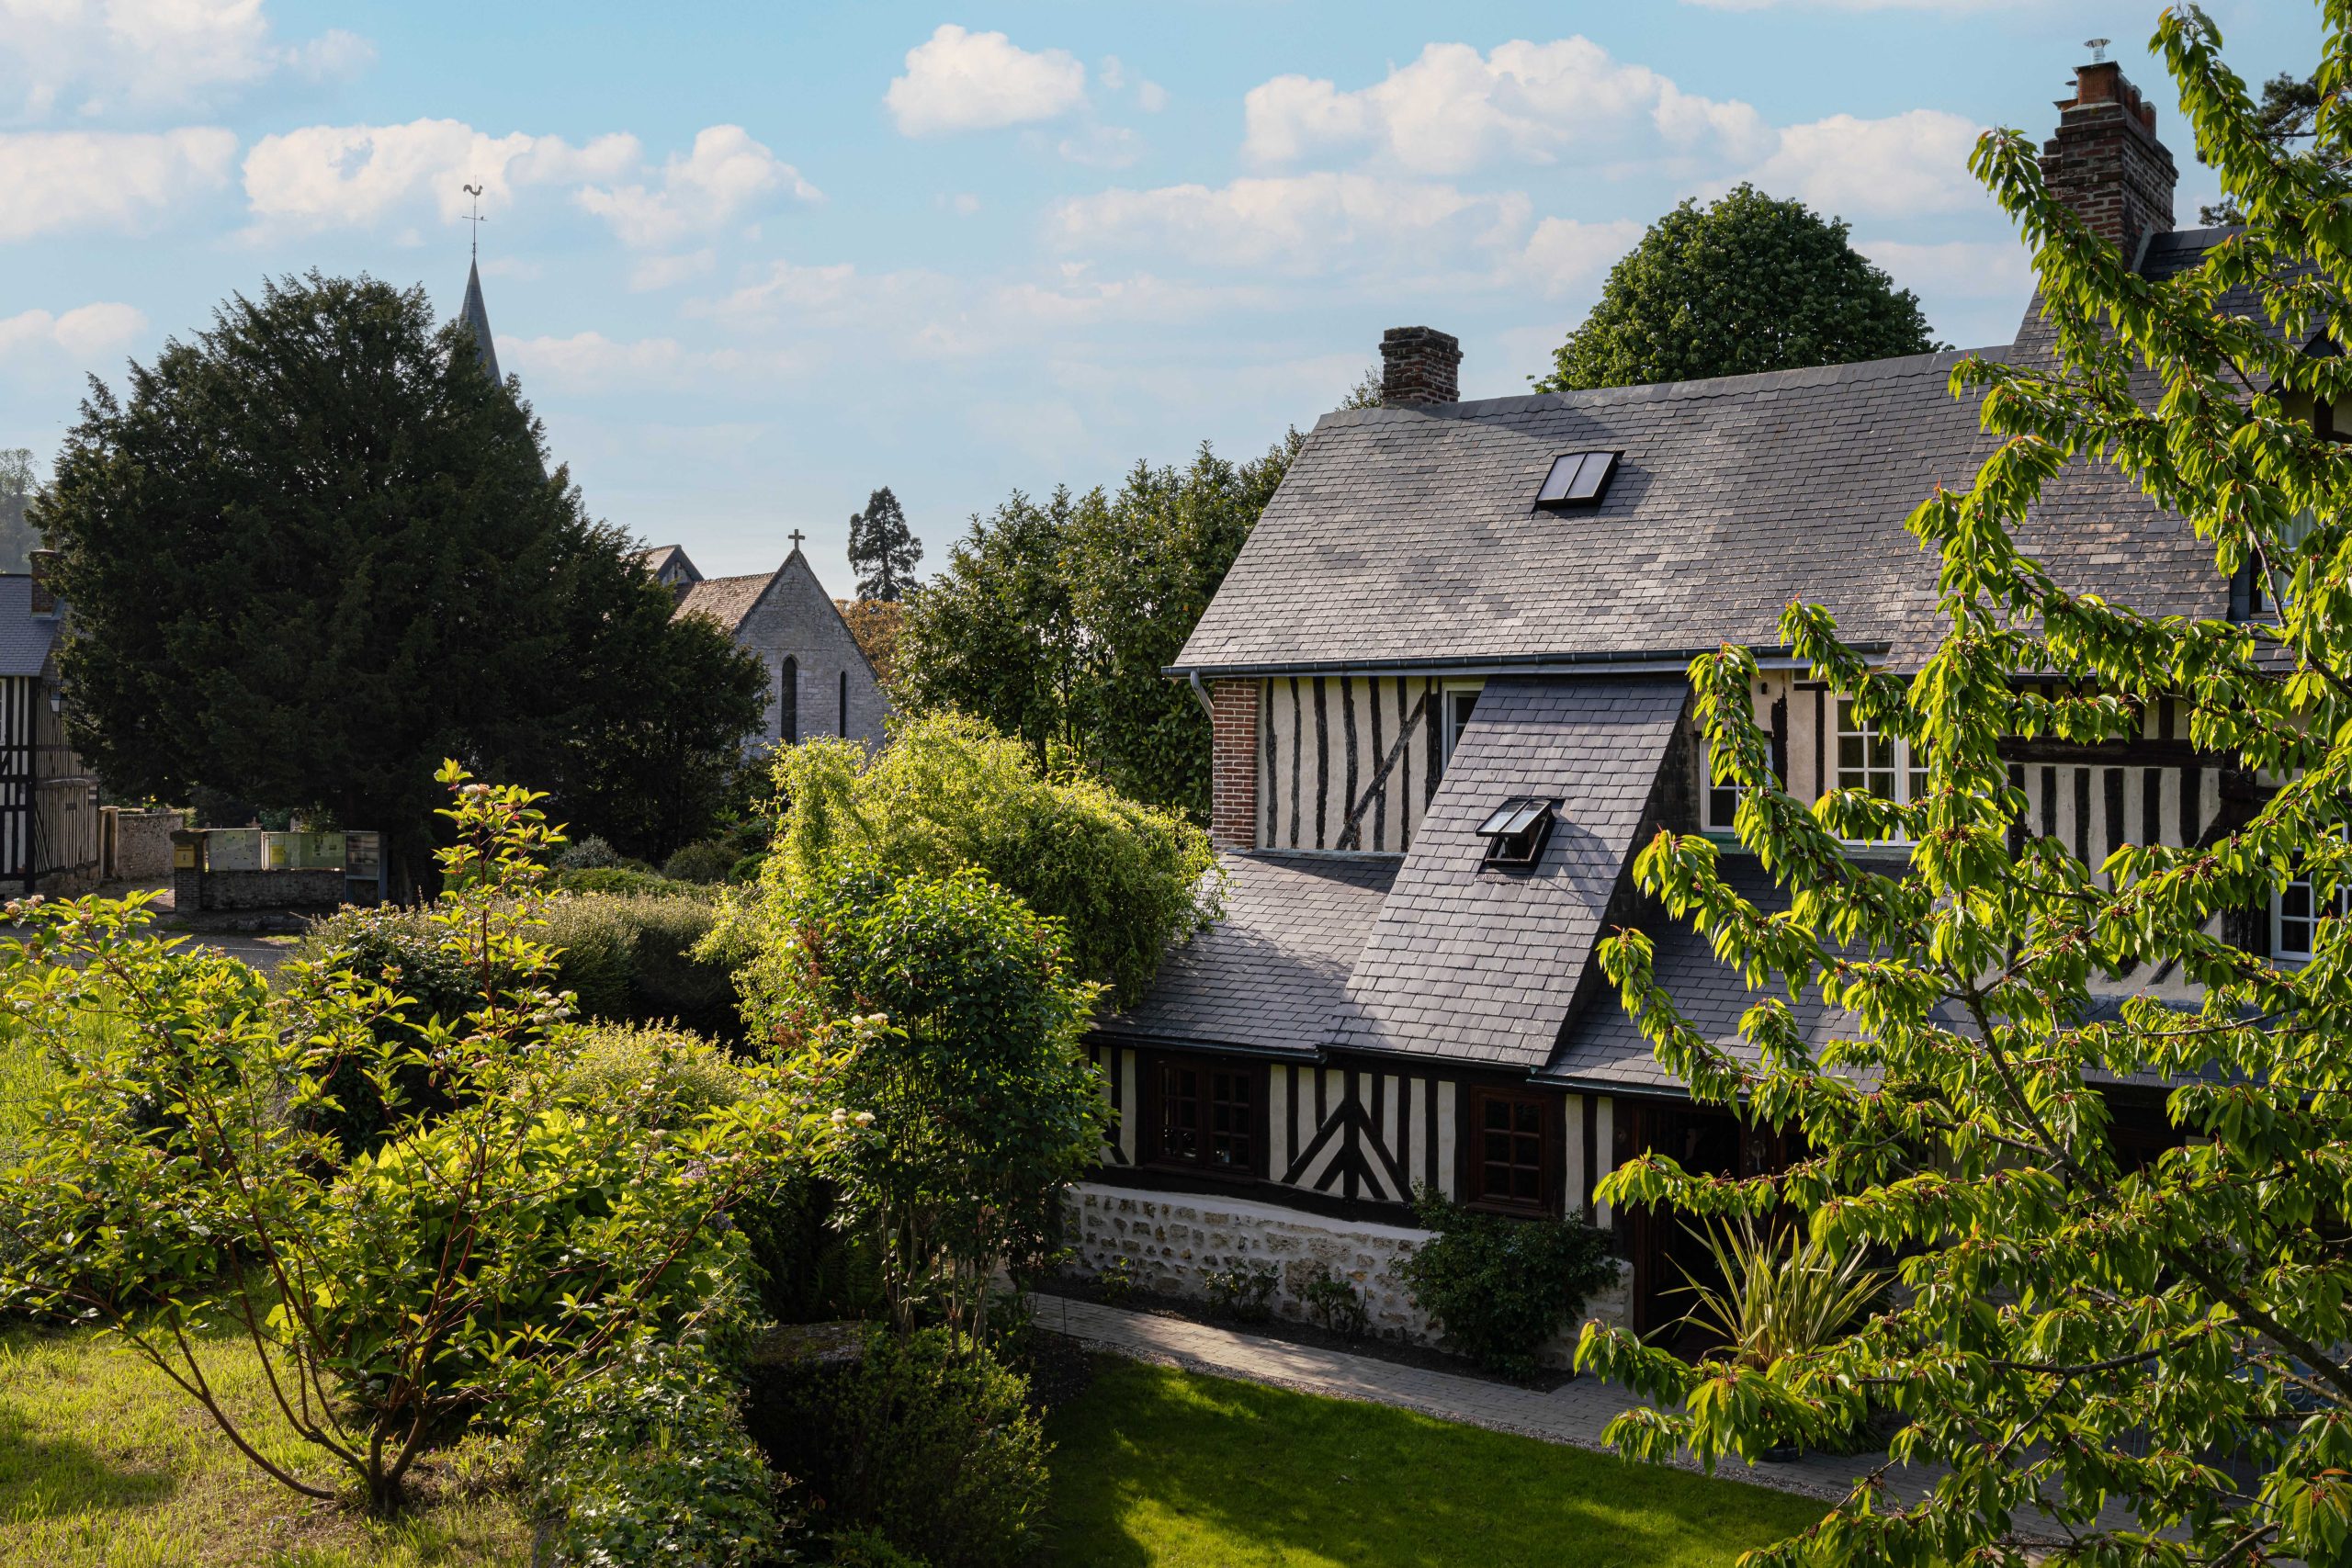 stone house with slate roof, surrounded by greenery - cottage honfleur